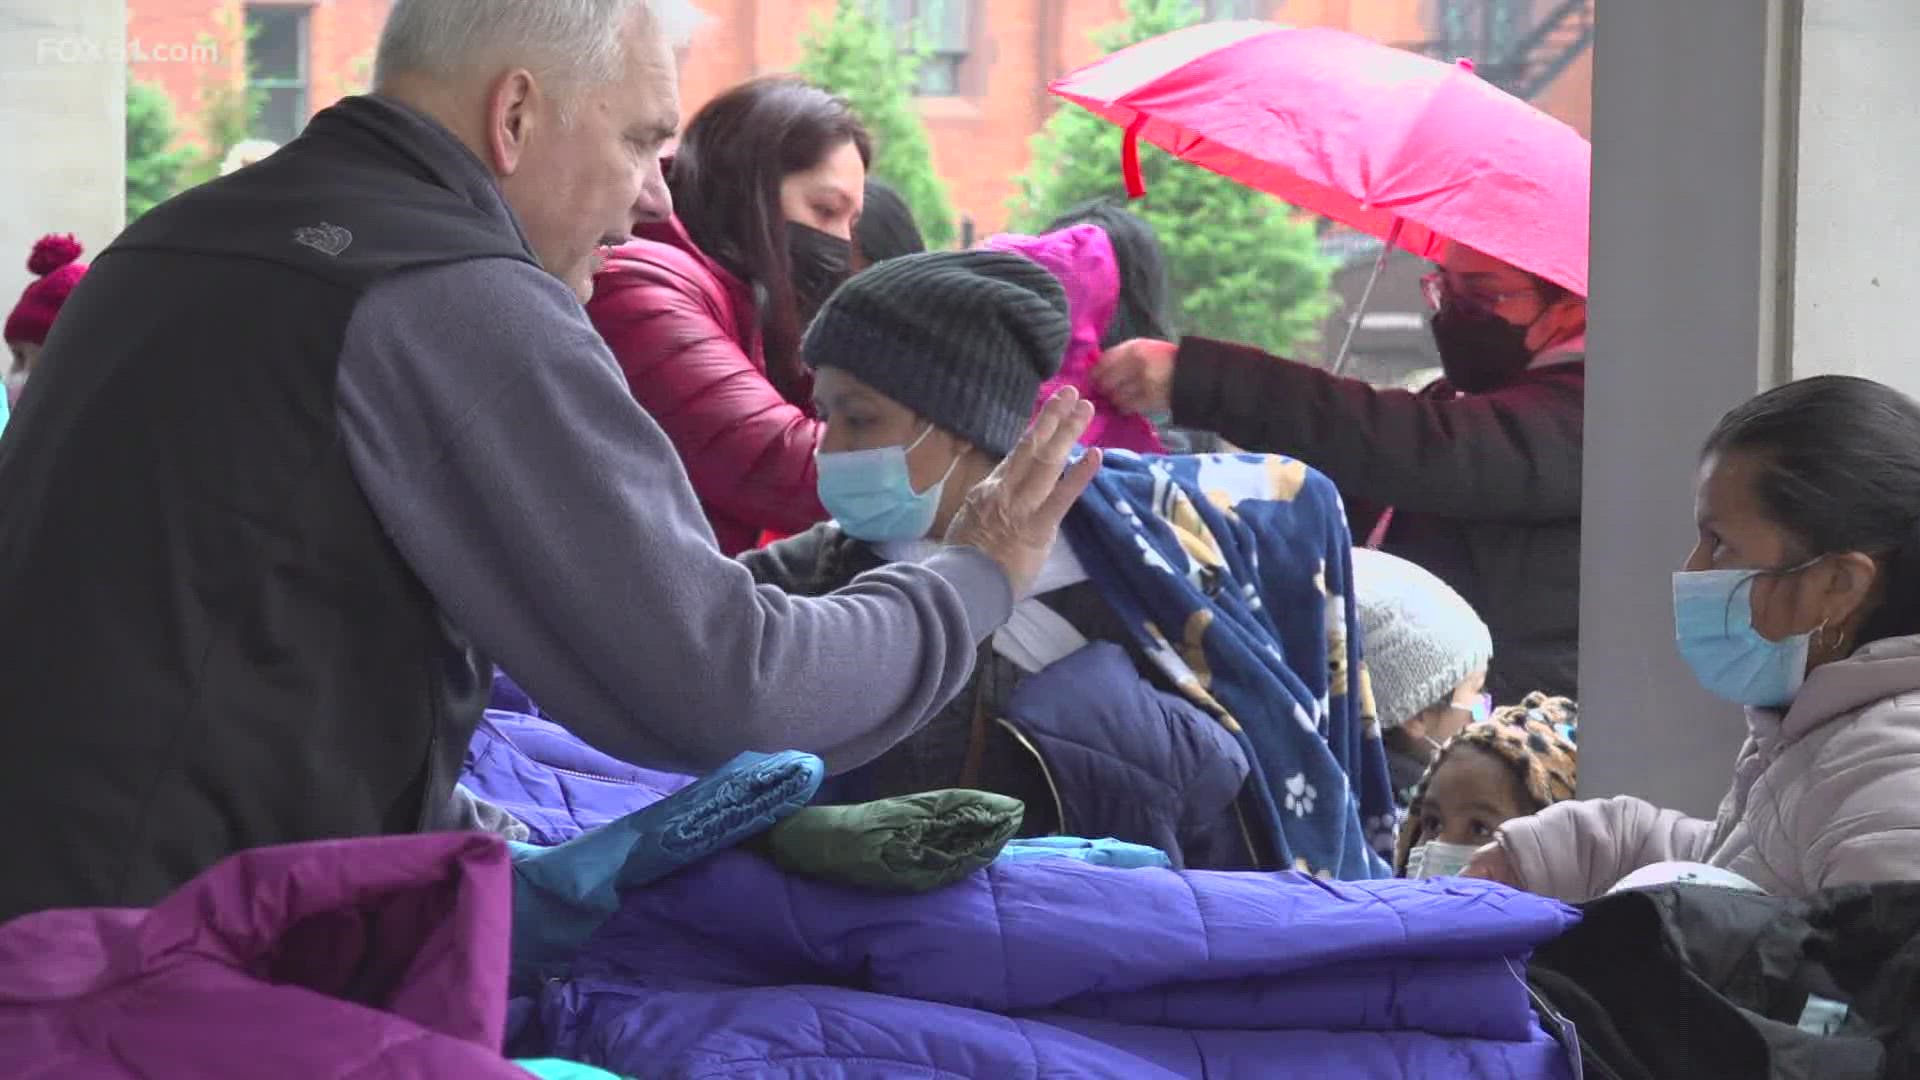 The Friday morning rain did not stop lines growing outside the Cathedral of St. Joseph in Hartford for the Knights of Columbus annual Coats for Kids drive.